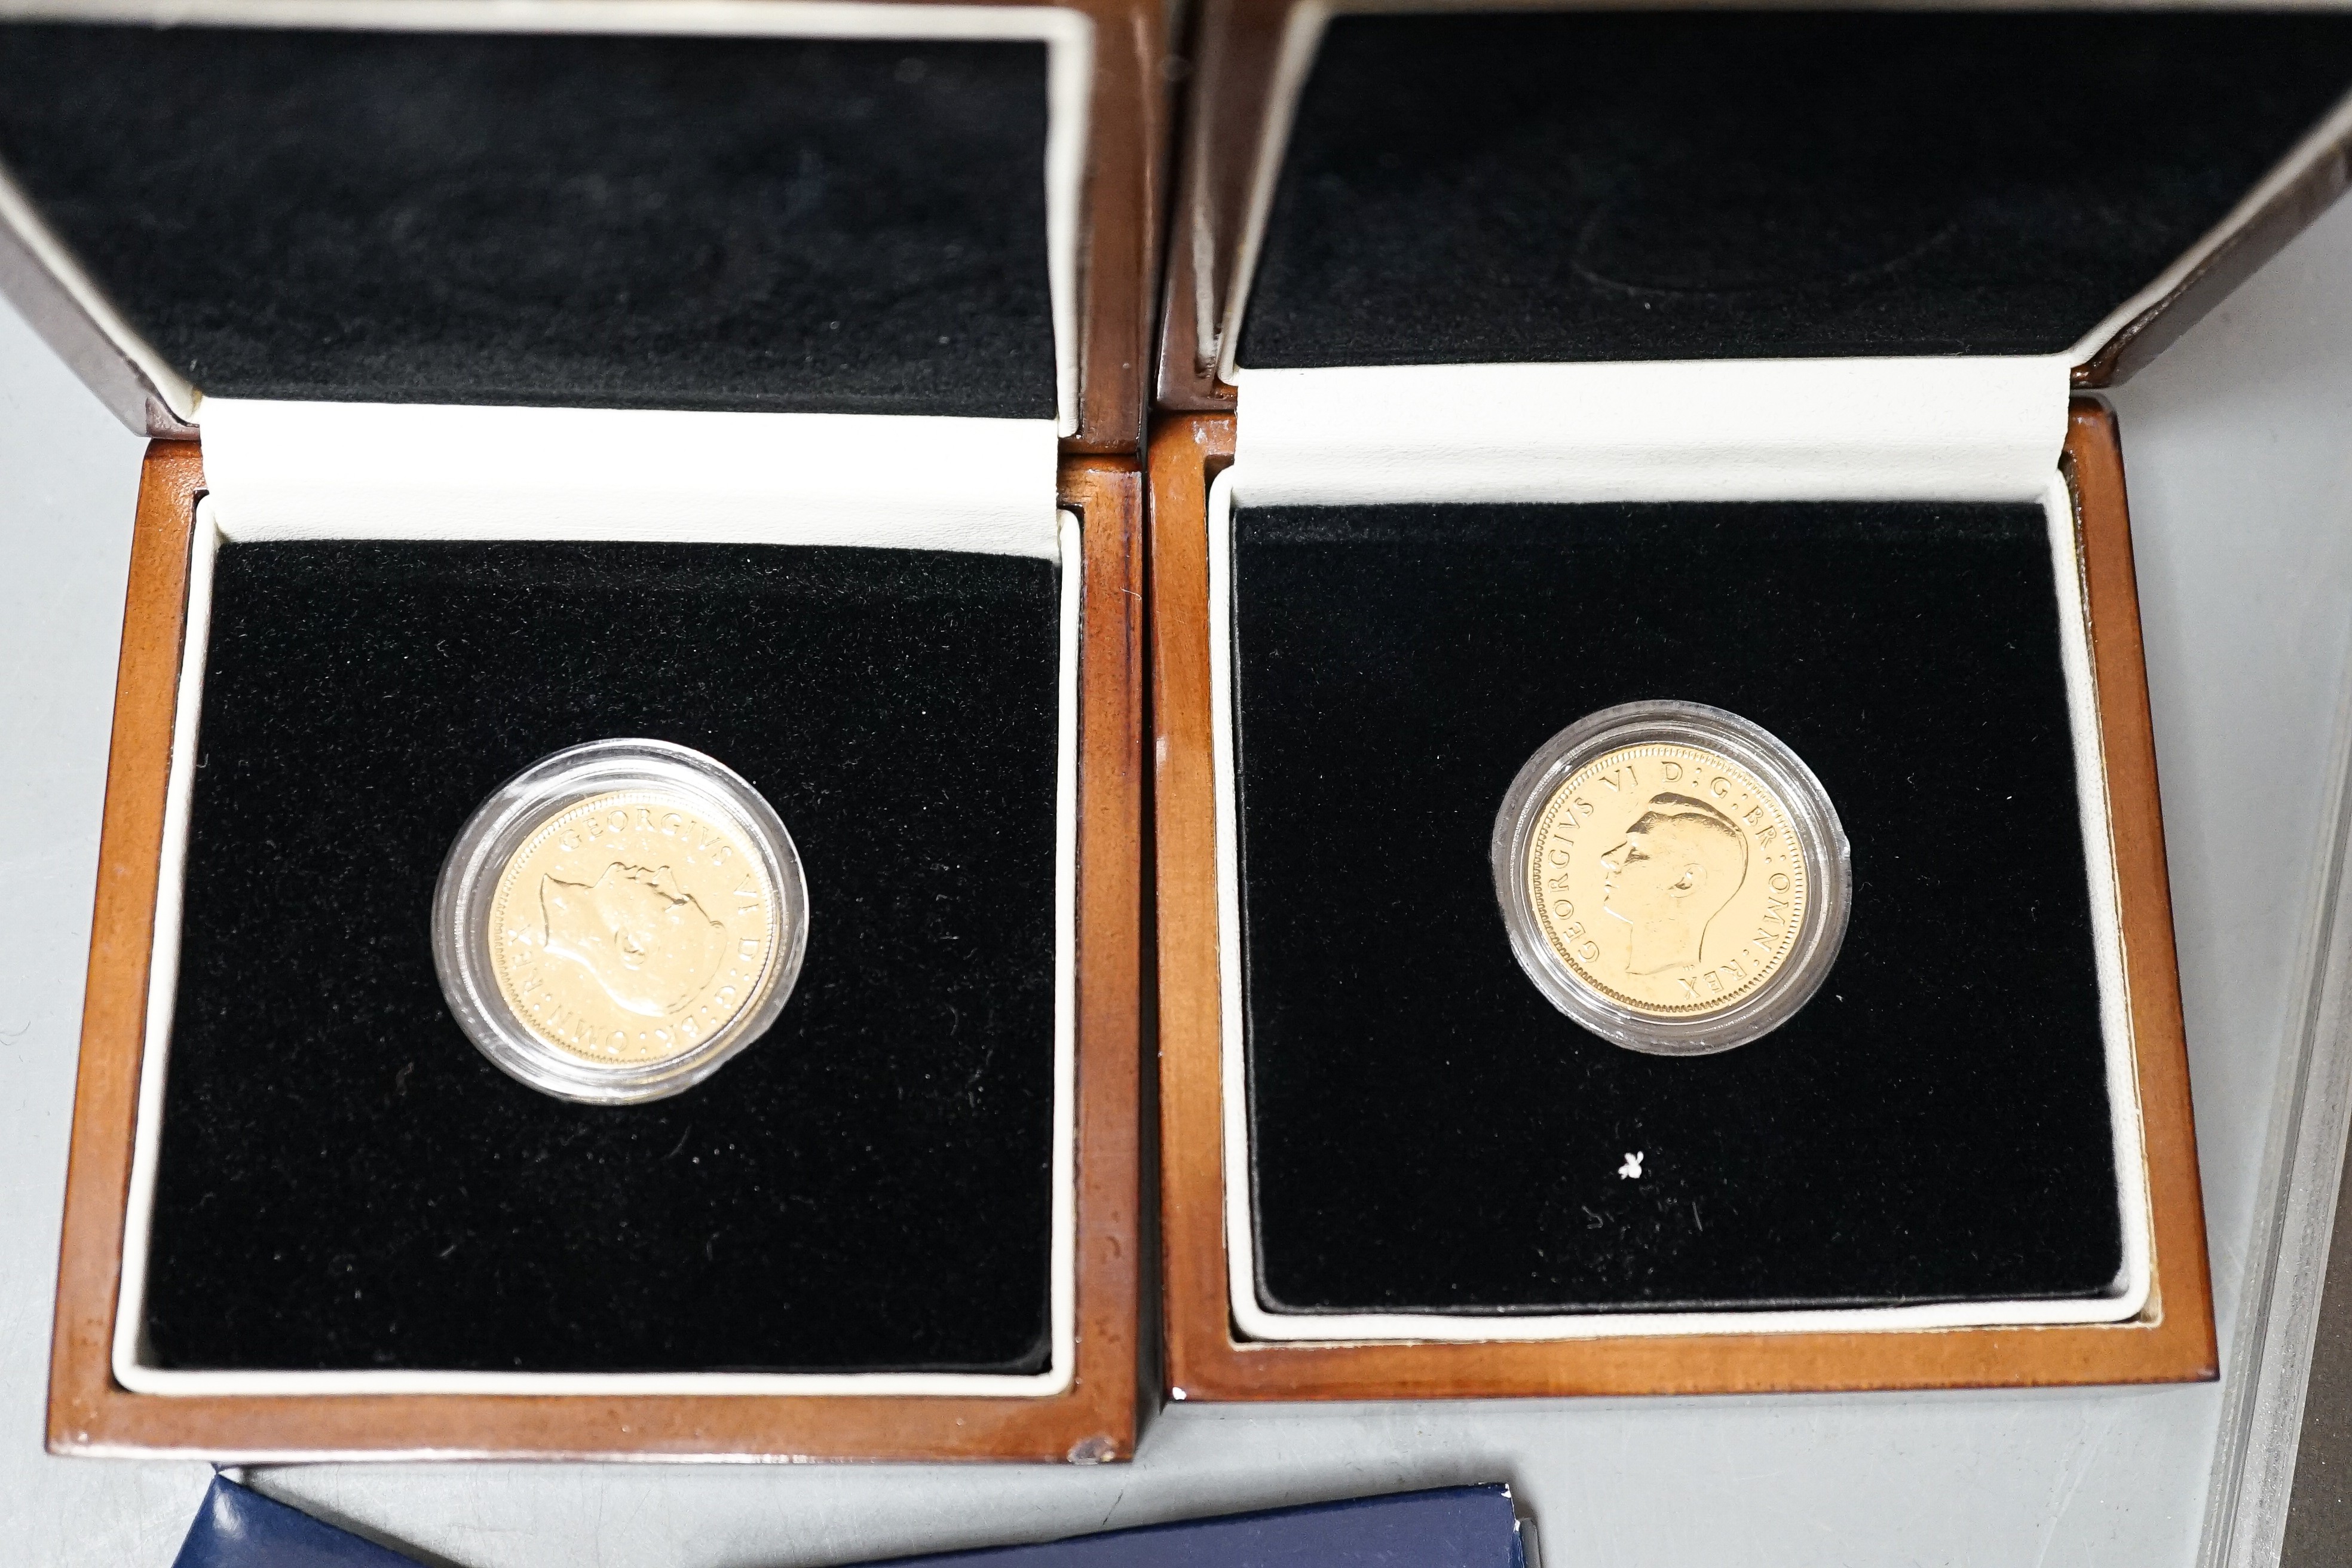 Two Royal Mint year sets 1970 & 1971 various London mint commemorative coins and later gold plated - Image 4 of 6